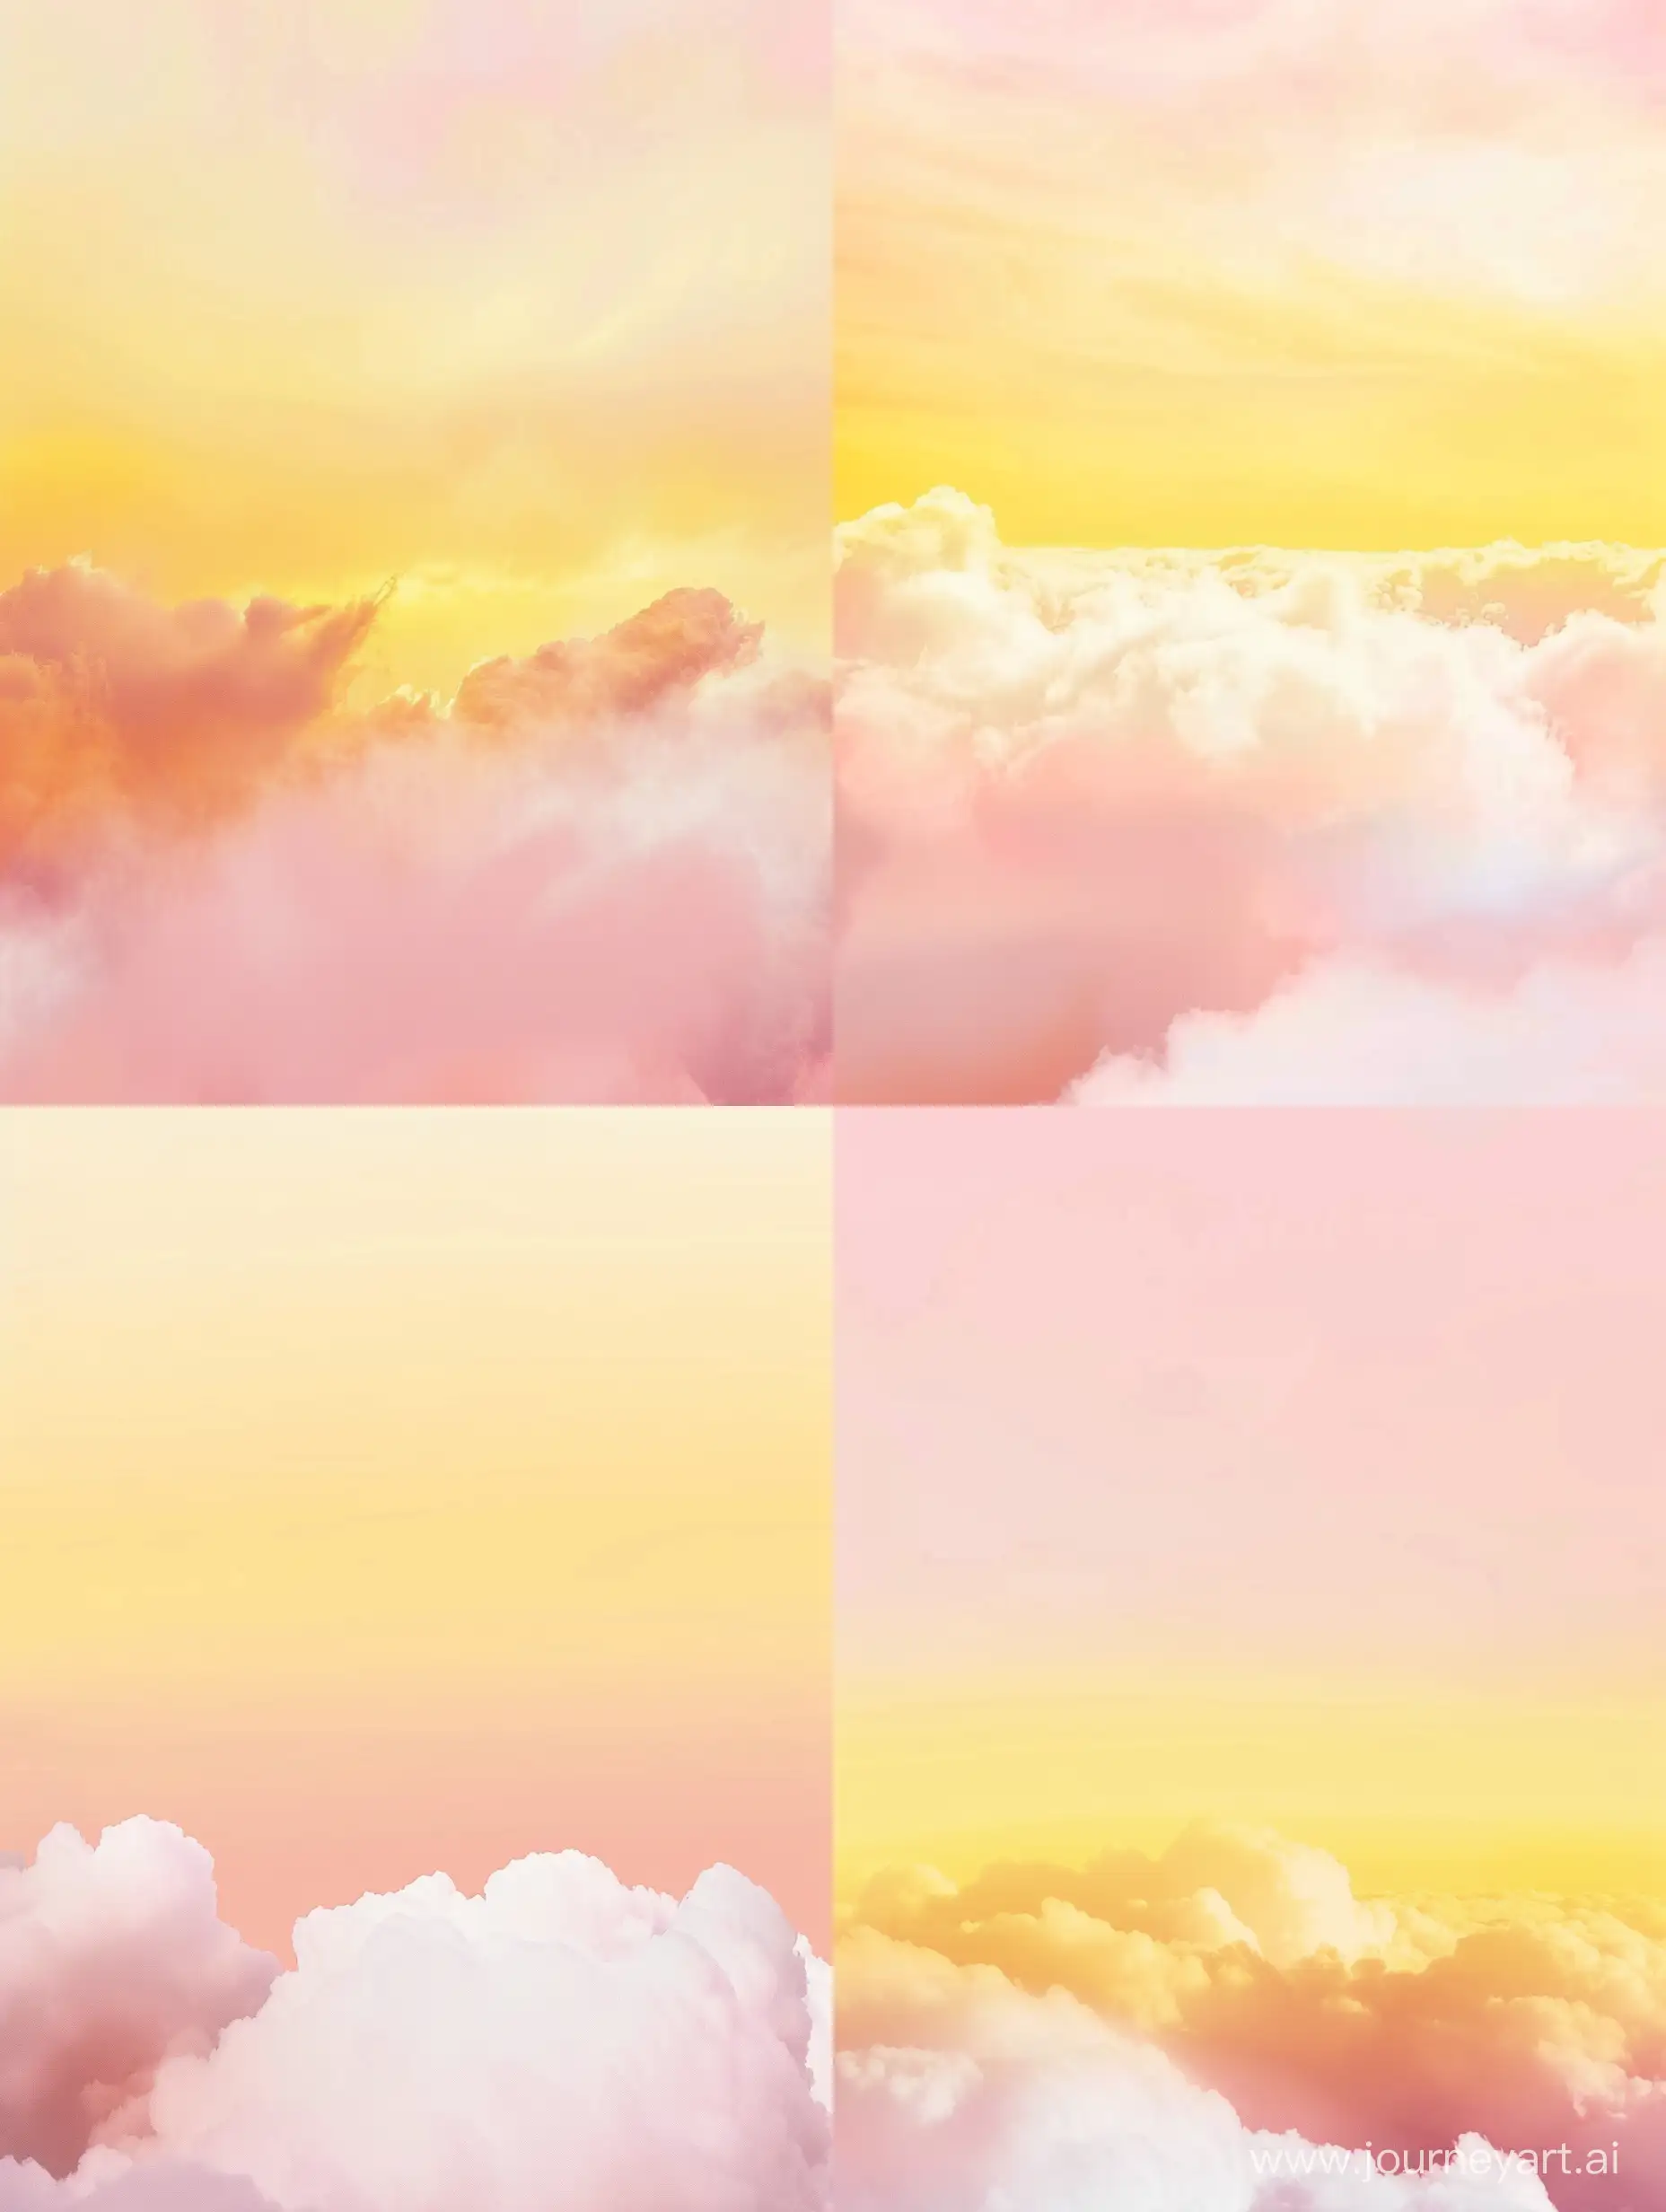 Tranquil-Sunrise-Soft-Clouds-in-Pink-Yellow-and-Orange-Skies